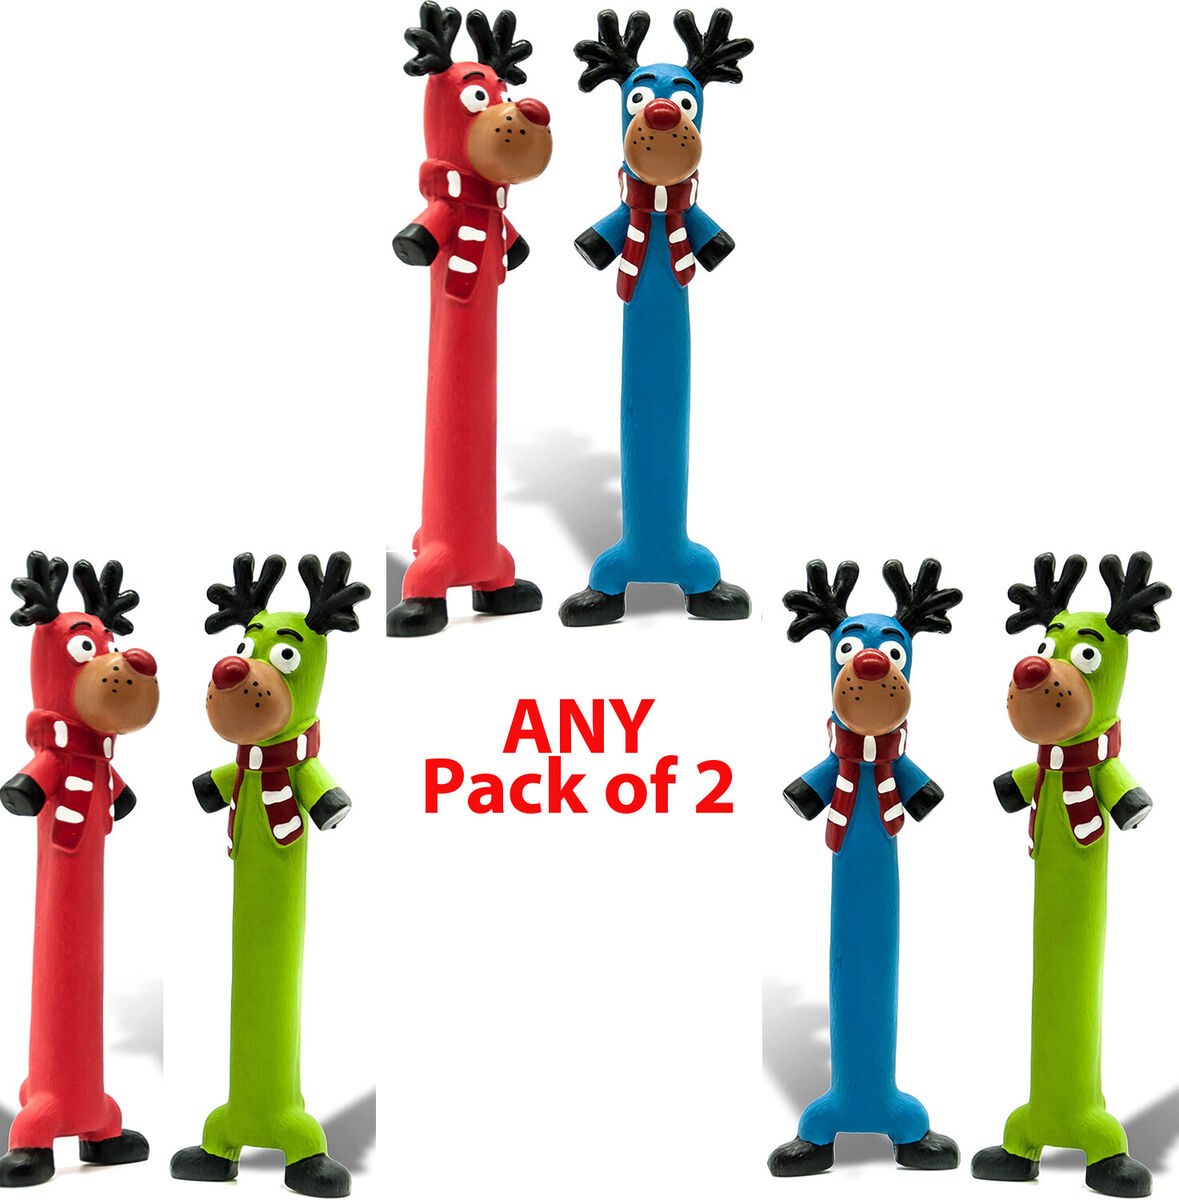 10 Long Squeaky Christmas Xmas Festive Squeaky LATEX Dog Chew Toys Gift  RUDOLPH